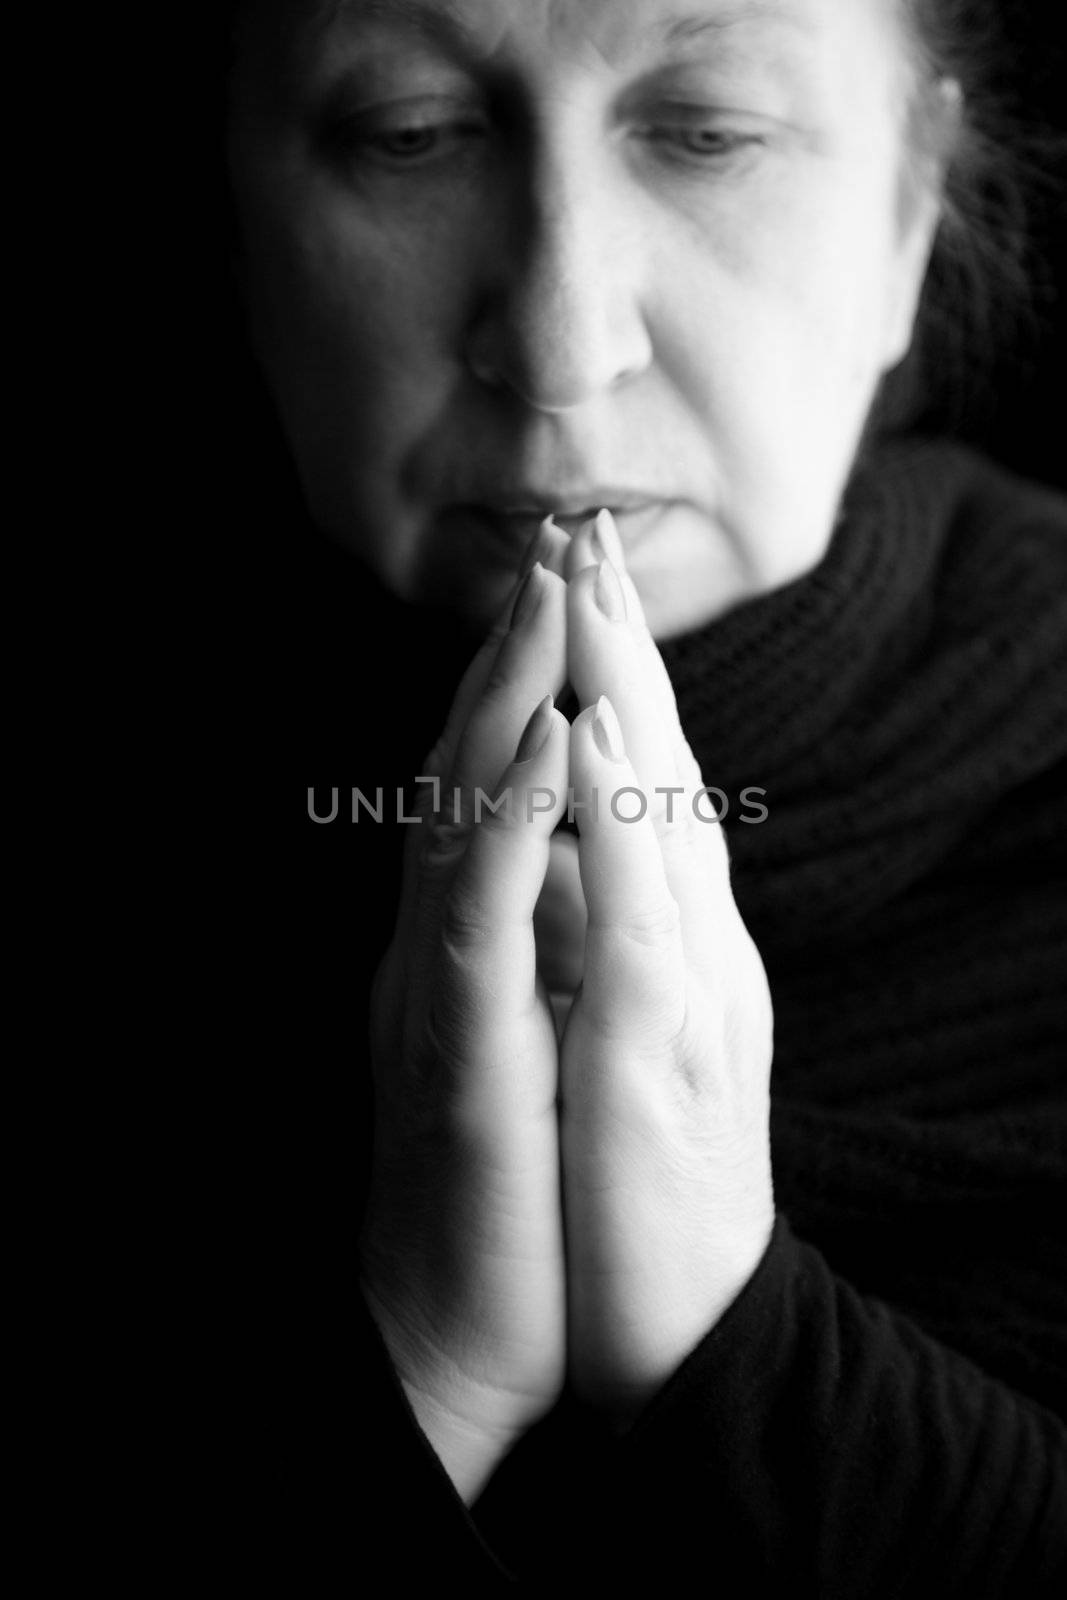 woman praying or deep in thoughts, special black and white film-looking photo f/x,focus on hands (nearest fingers)